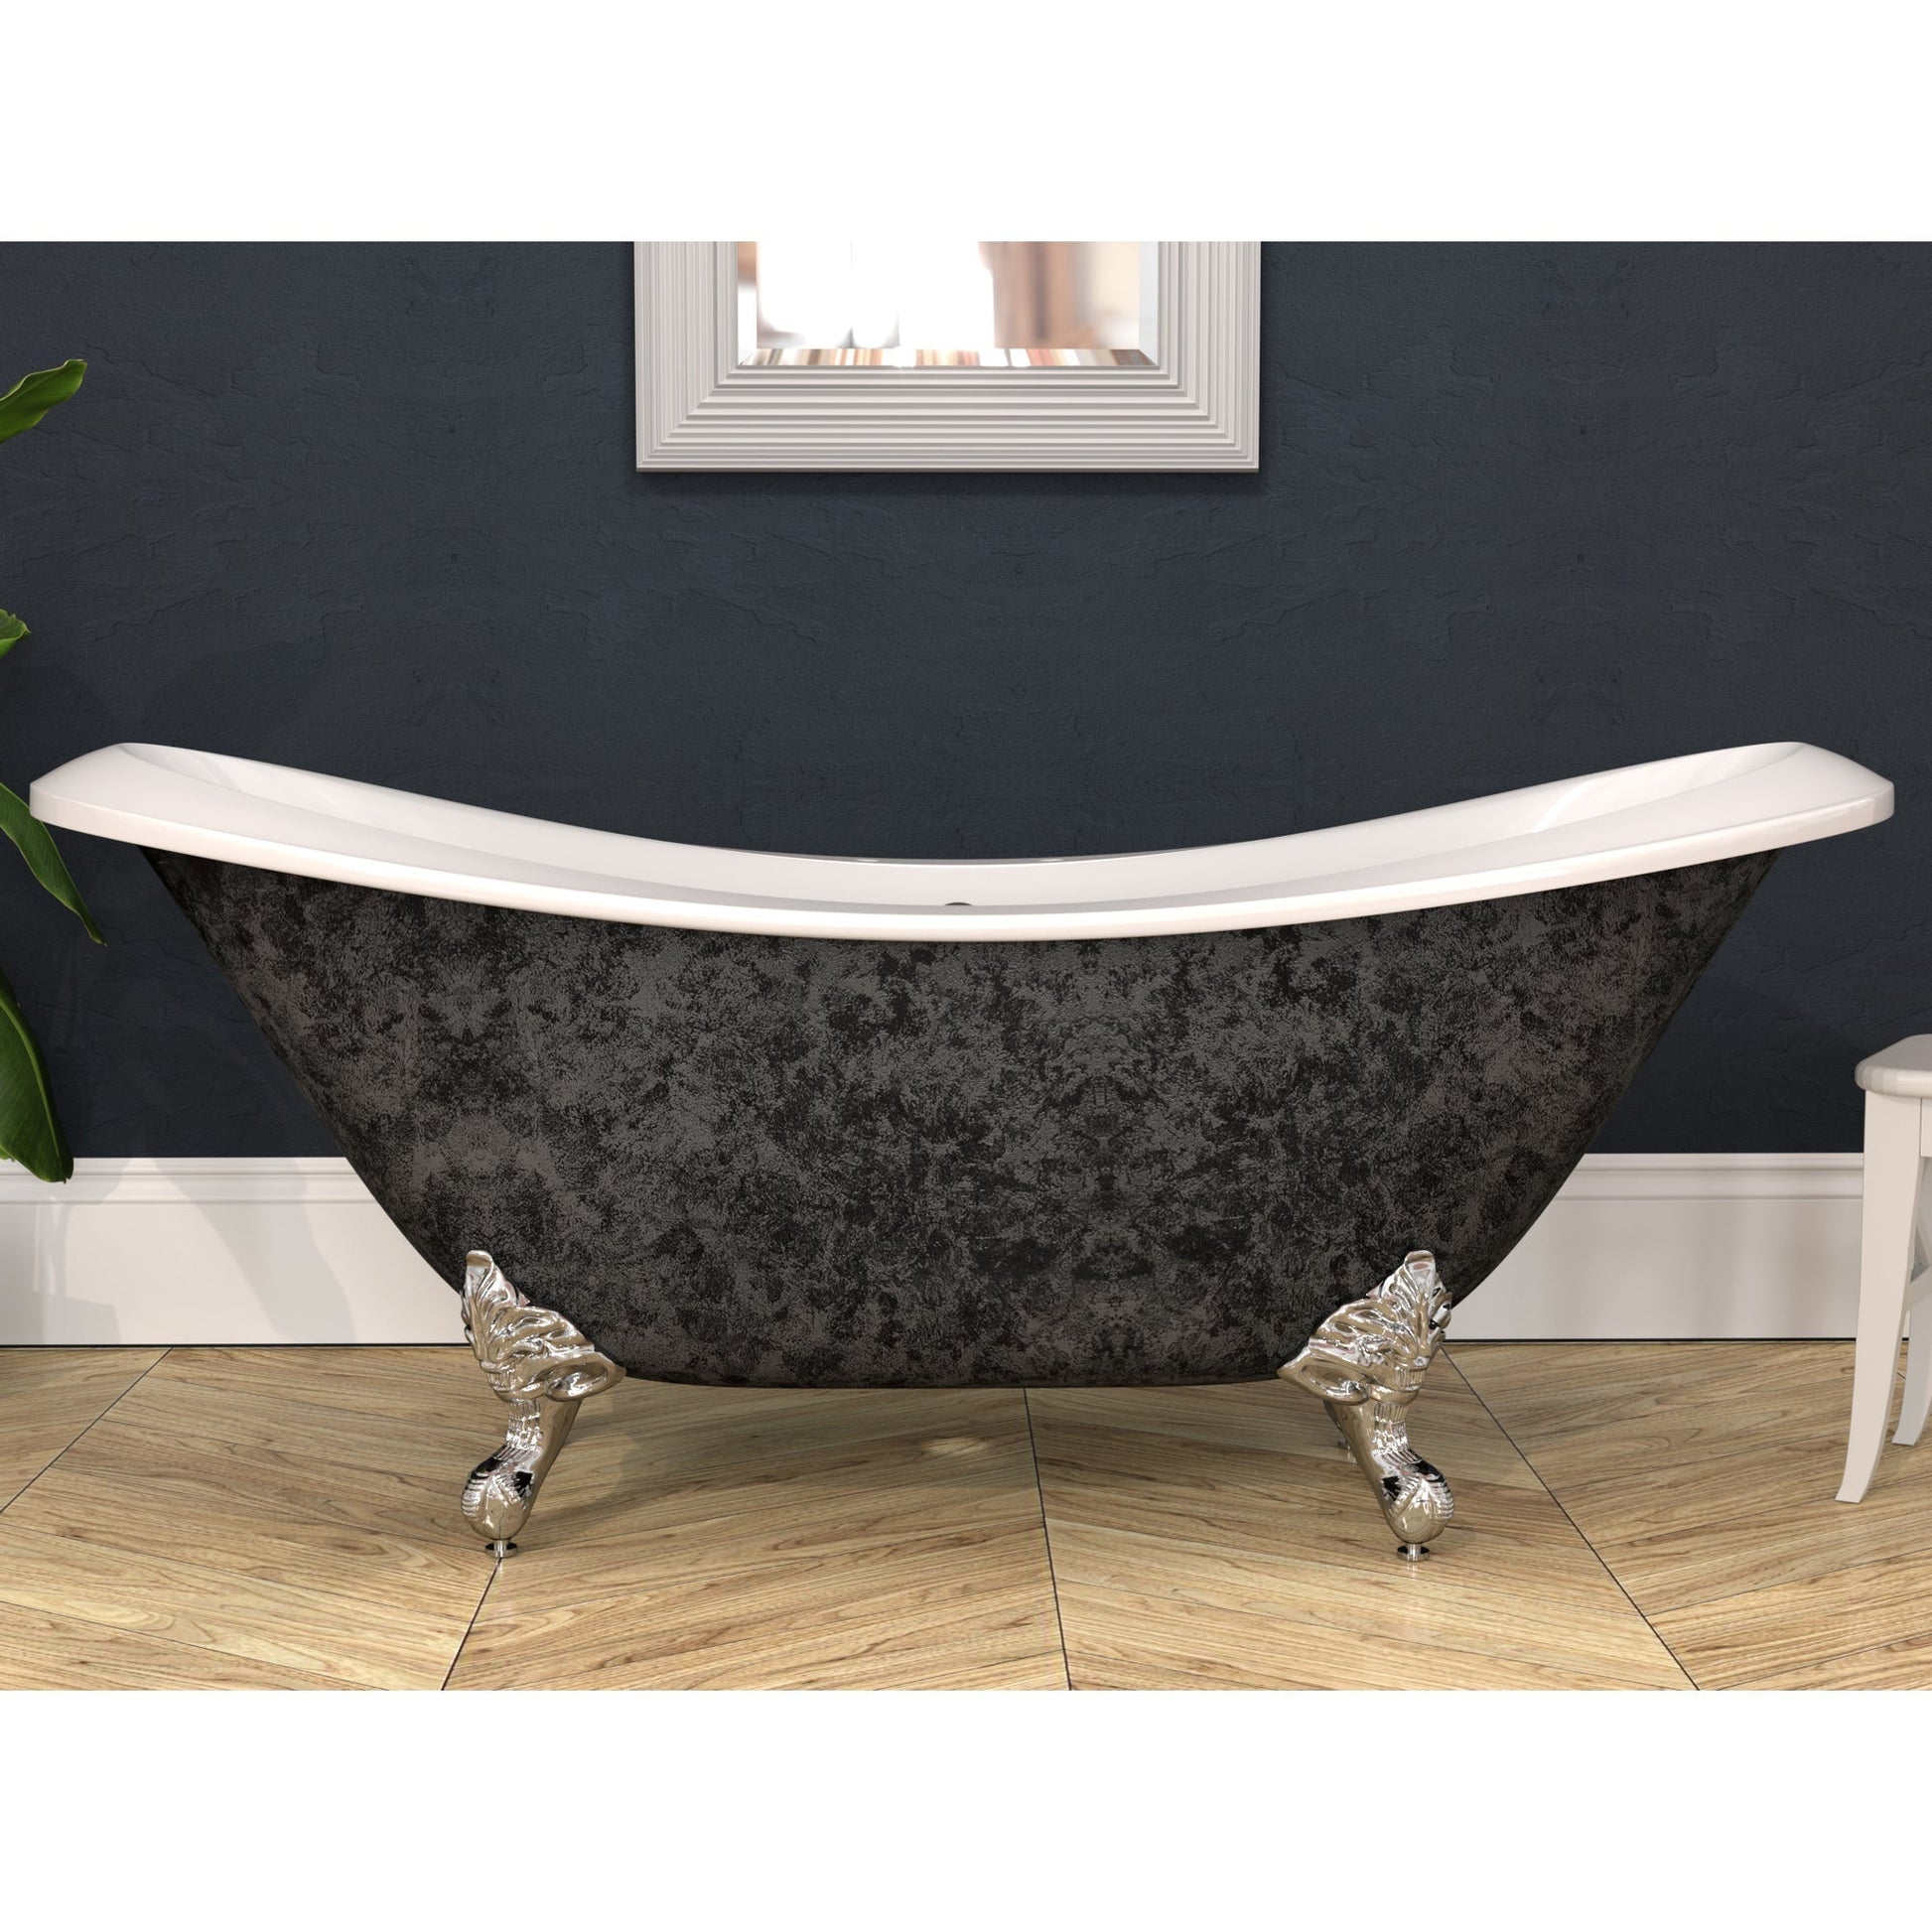 Cambridge Plumbing 73" Hand Painted Scorched Platinum Double Slipper Clawfoot Acrylic Bathtub With Deck Holes With Polished Chrome Clawfeet